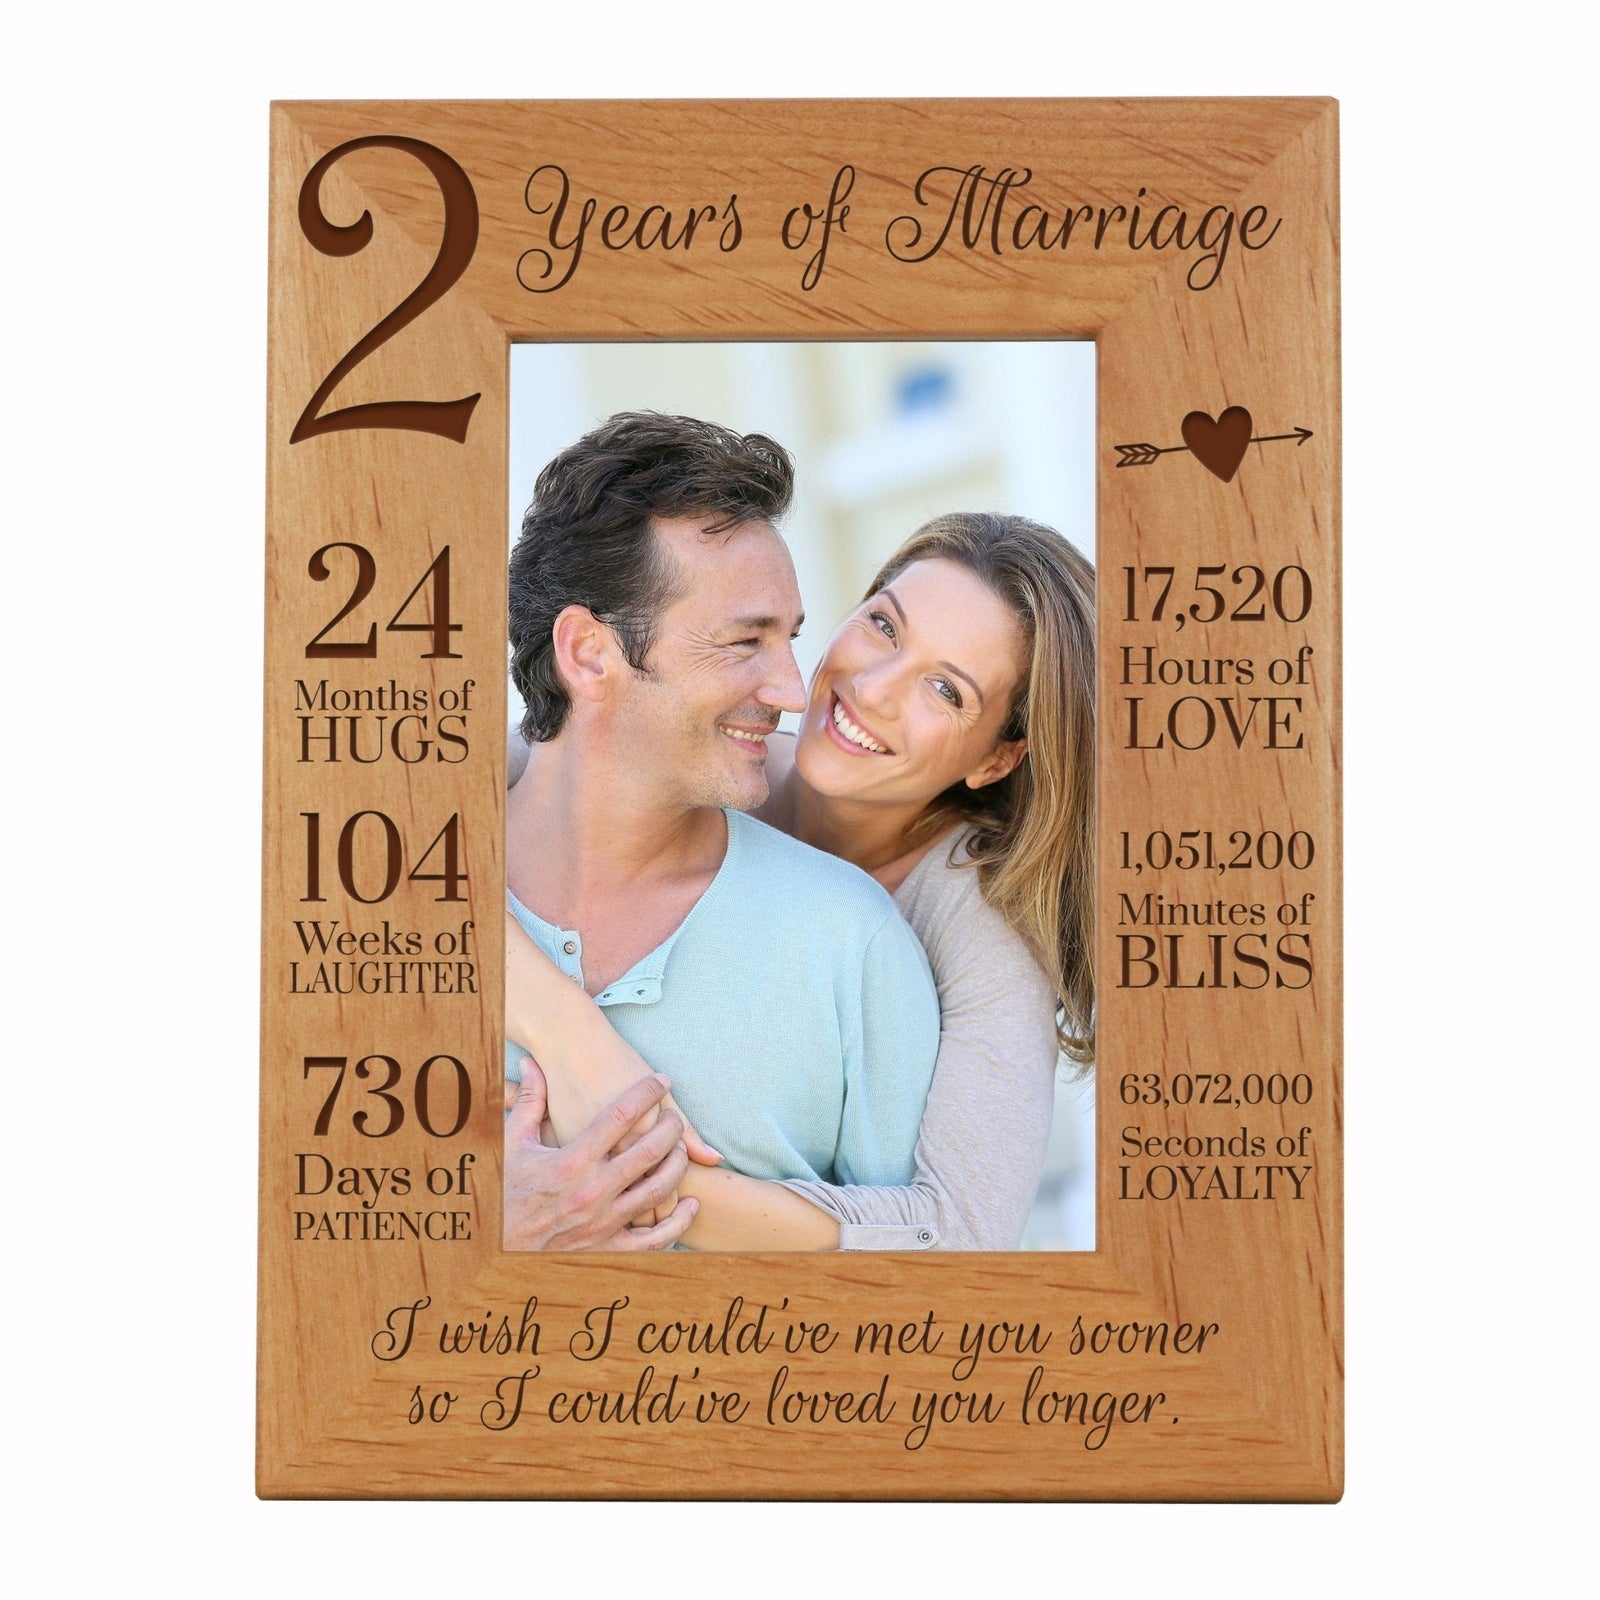 Engraved 2nd Wedding Anniversary Photo Frame Wall Decor Gift for Couples - Met You Sooner - LifeSong Milestones